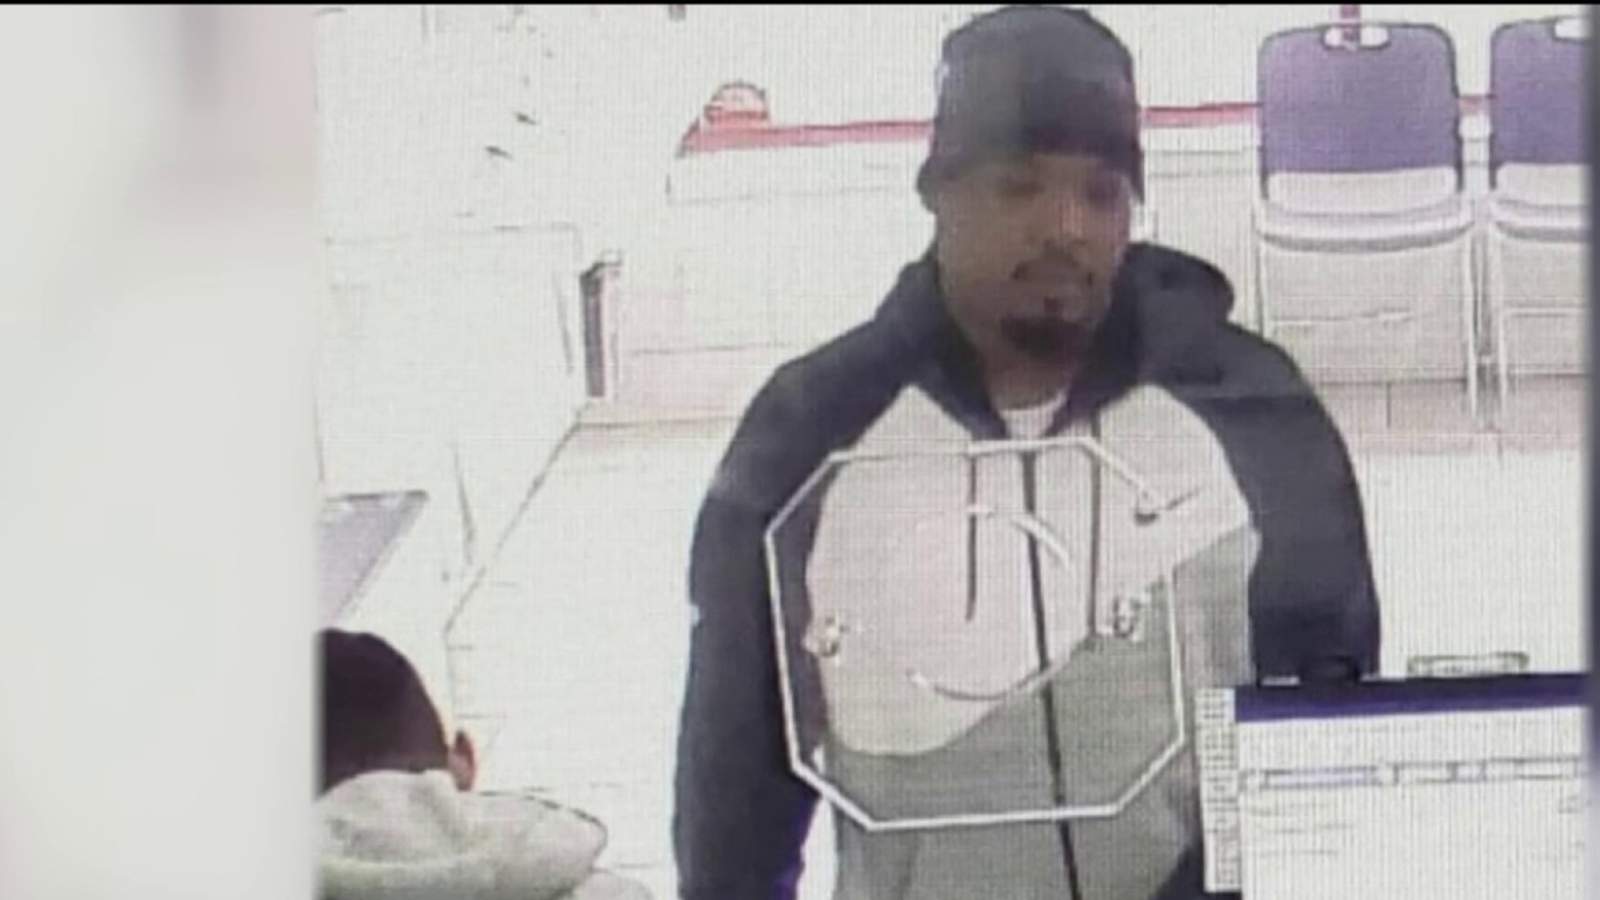 Man steals phone from Hamtramck store